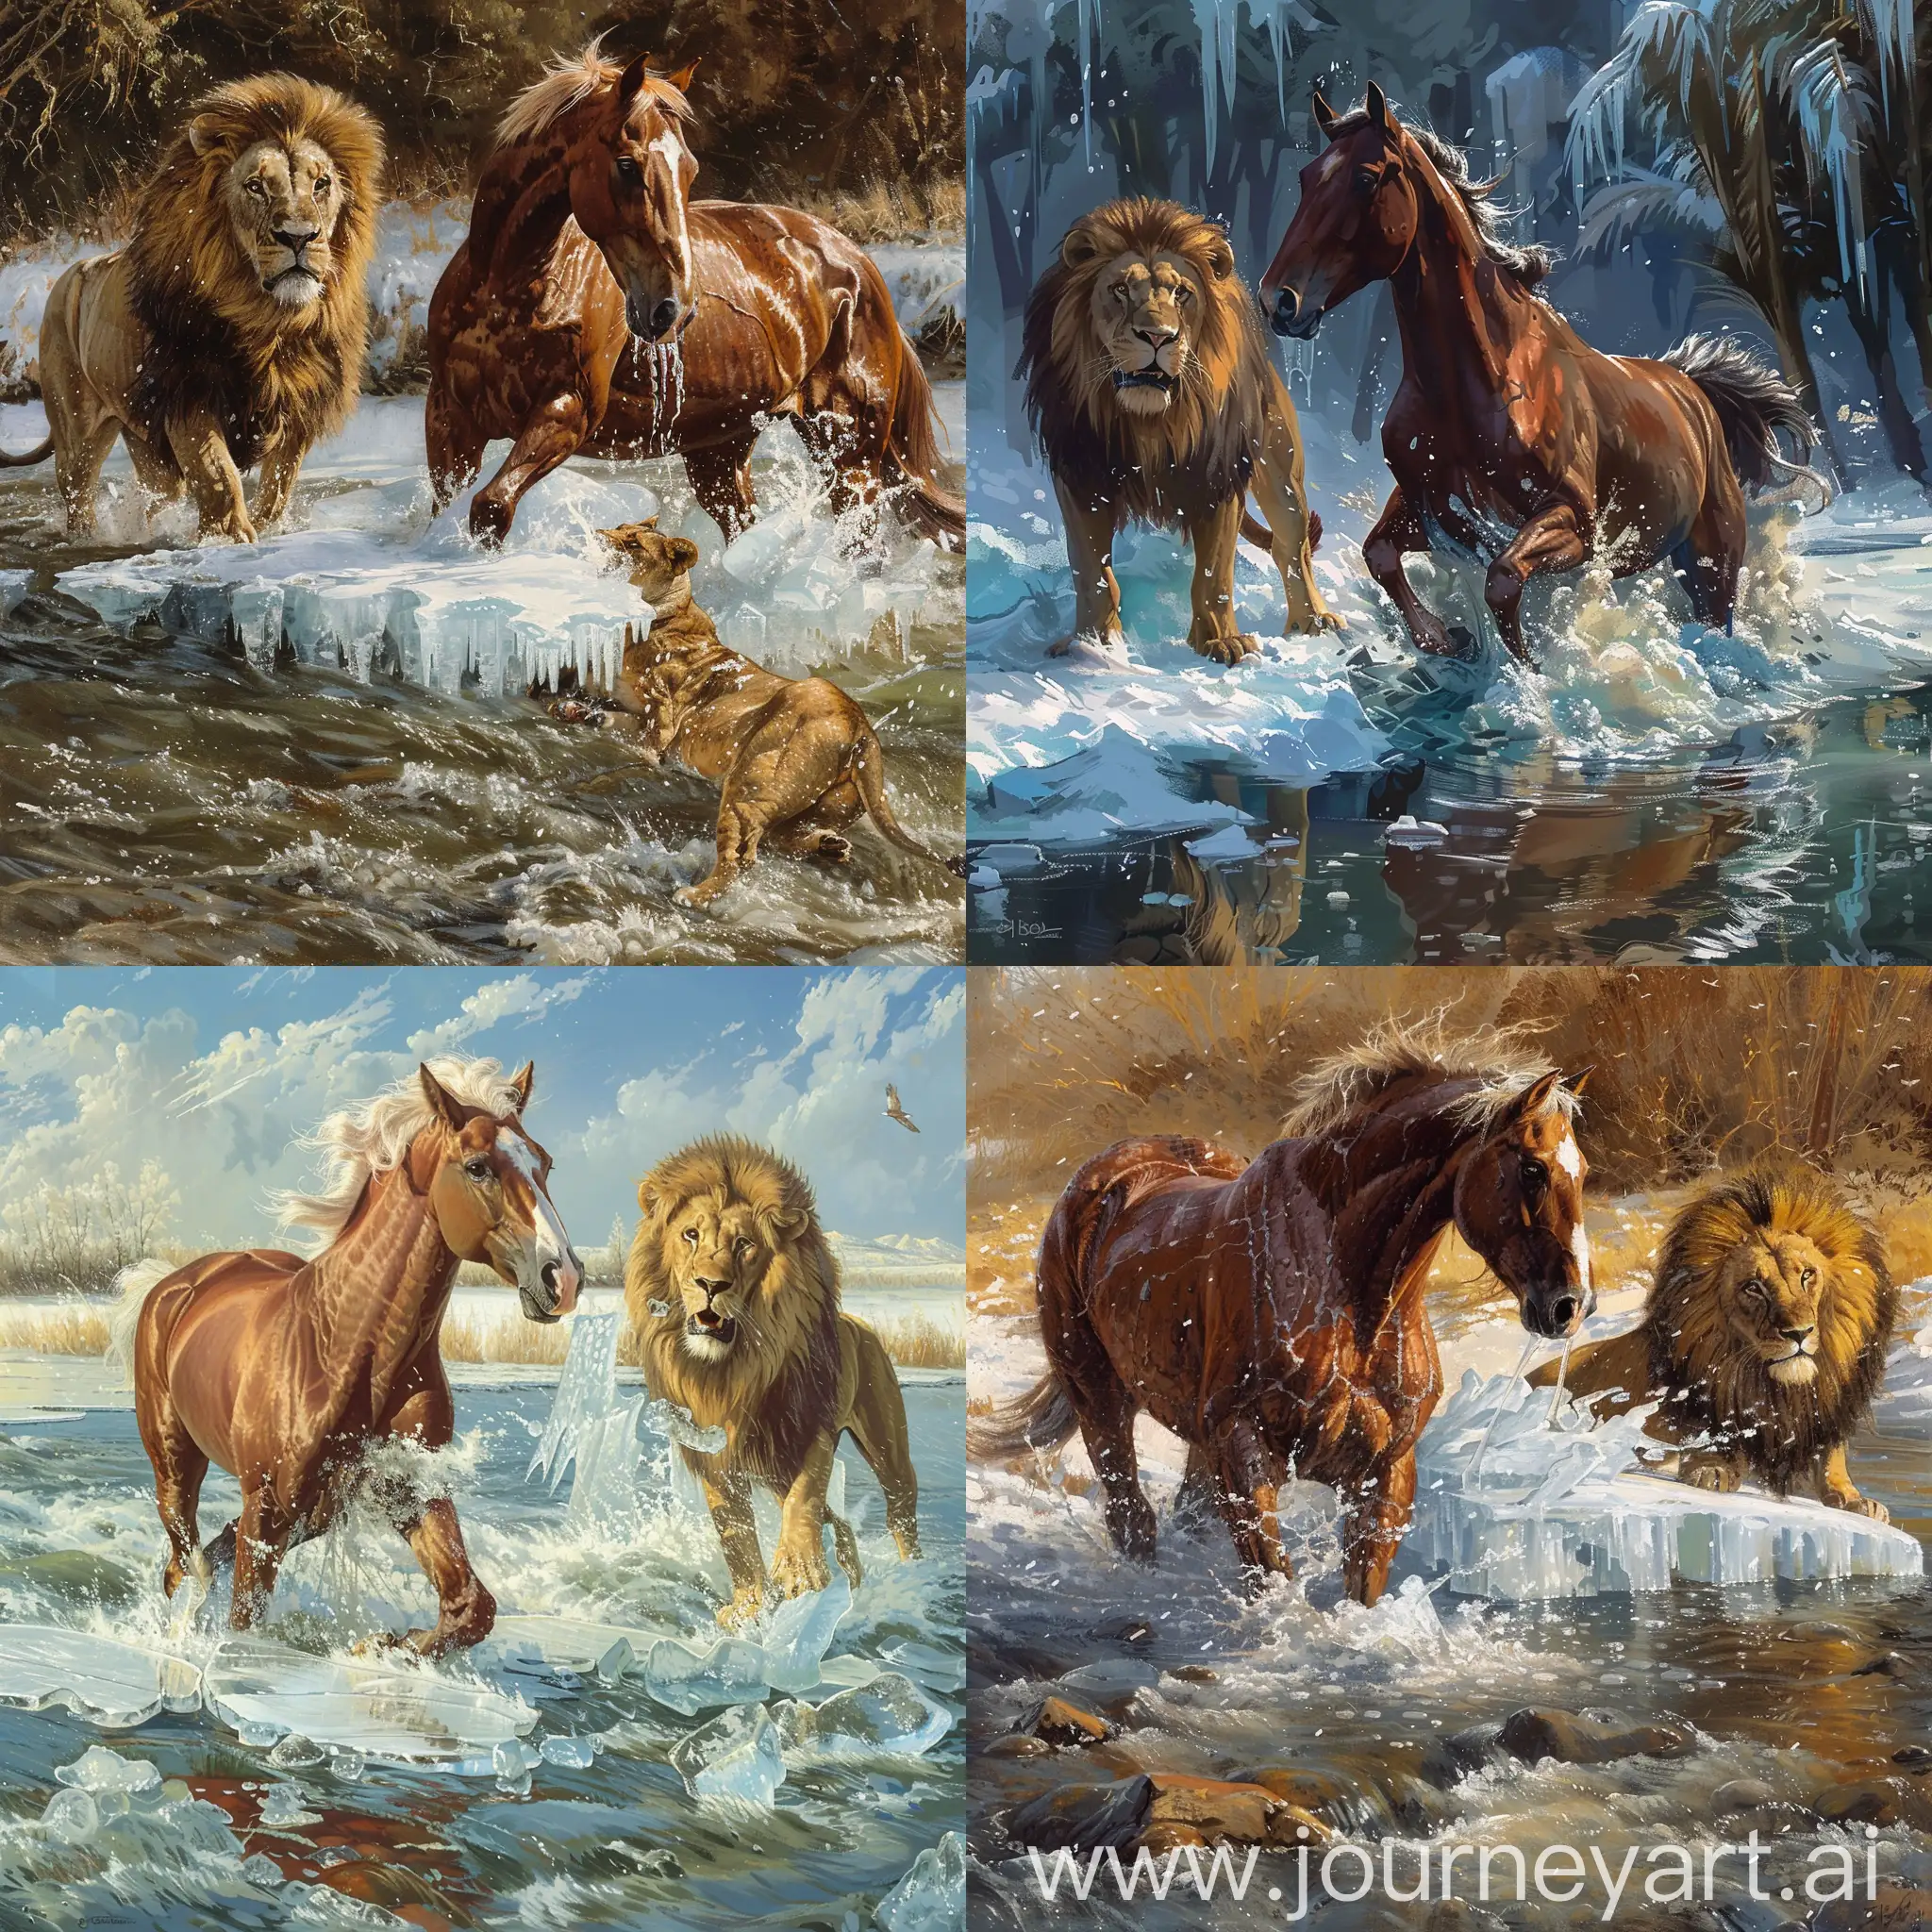 Daring-Horse-Rescues-Lion-on-Frozen-River